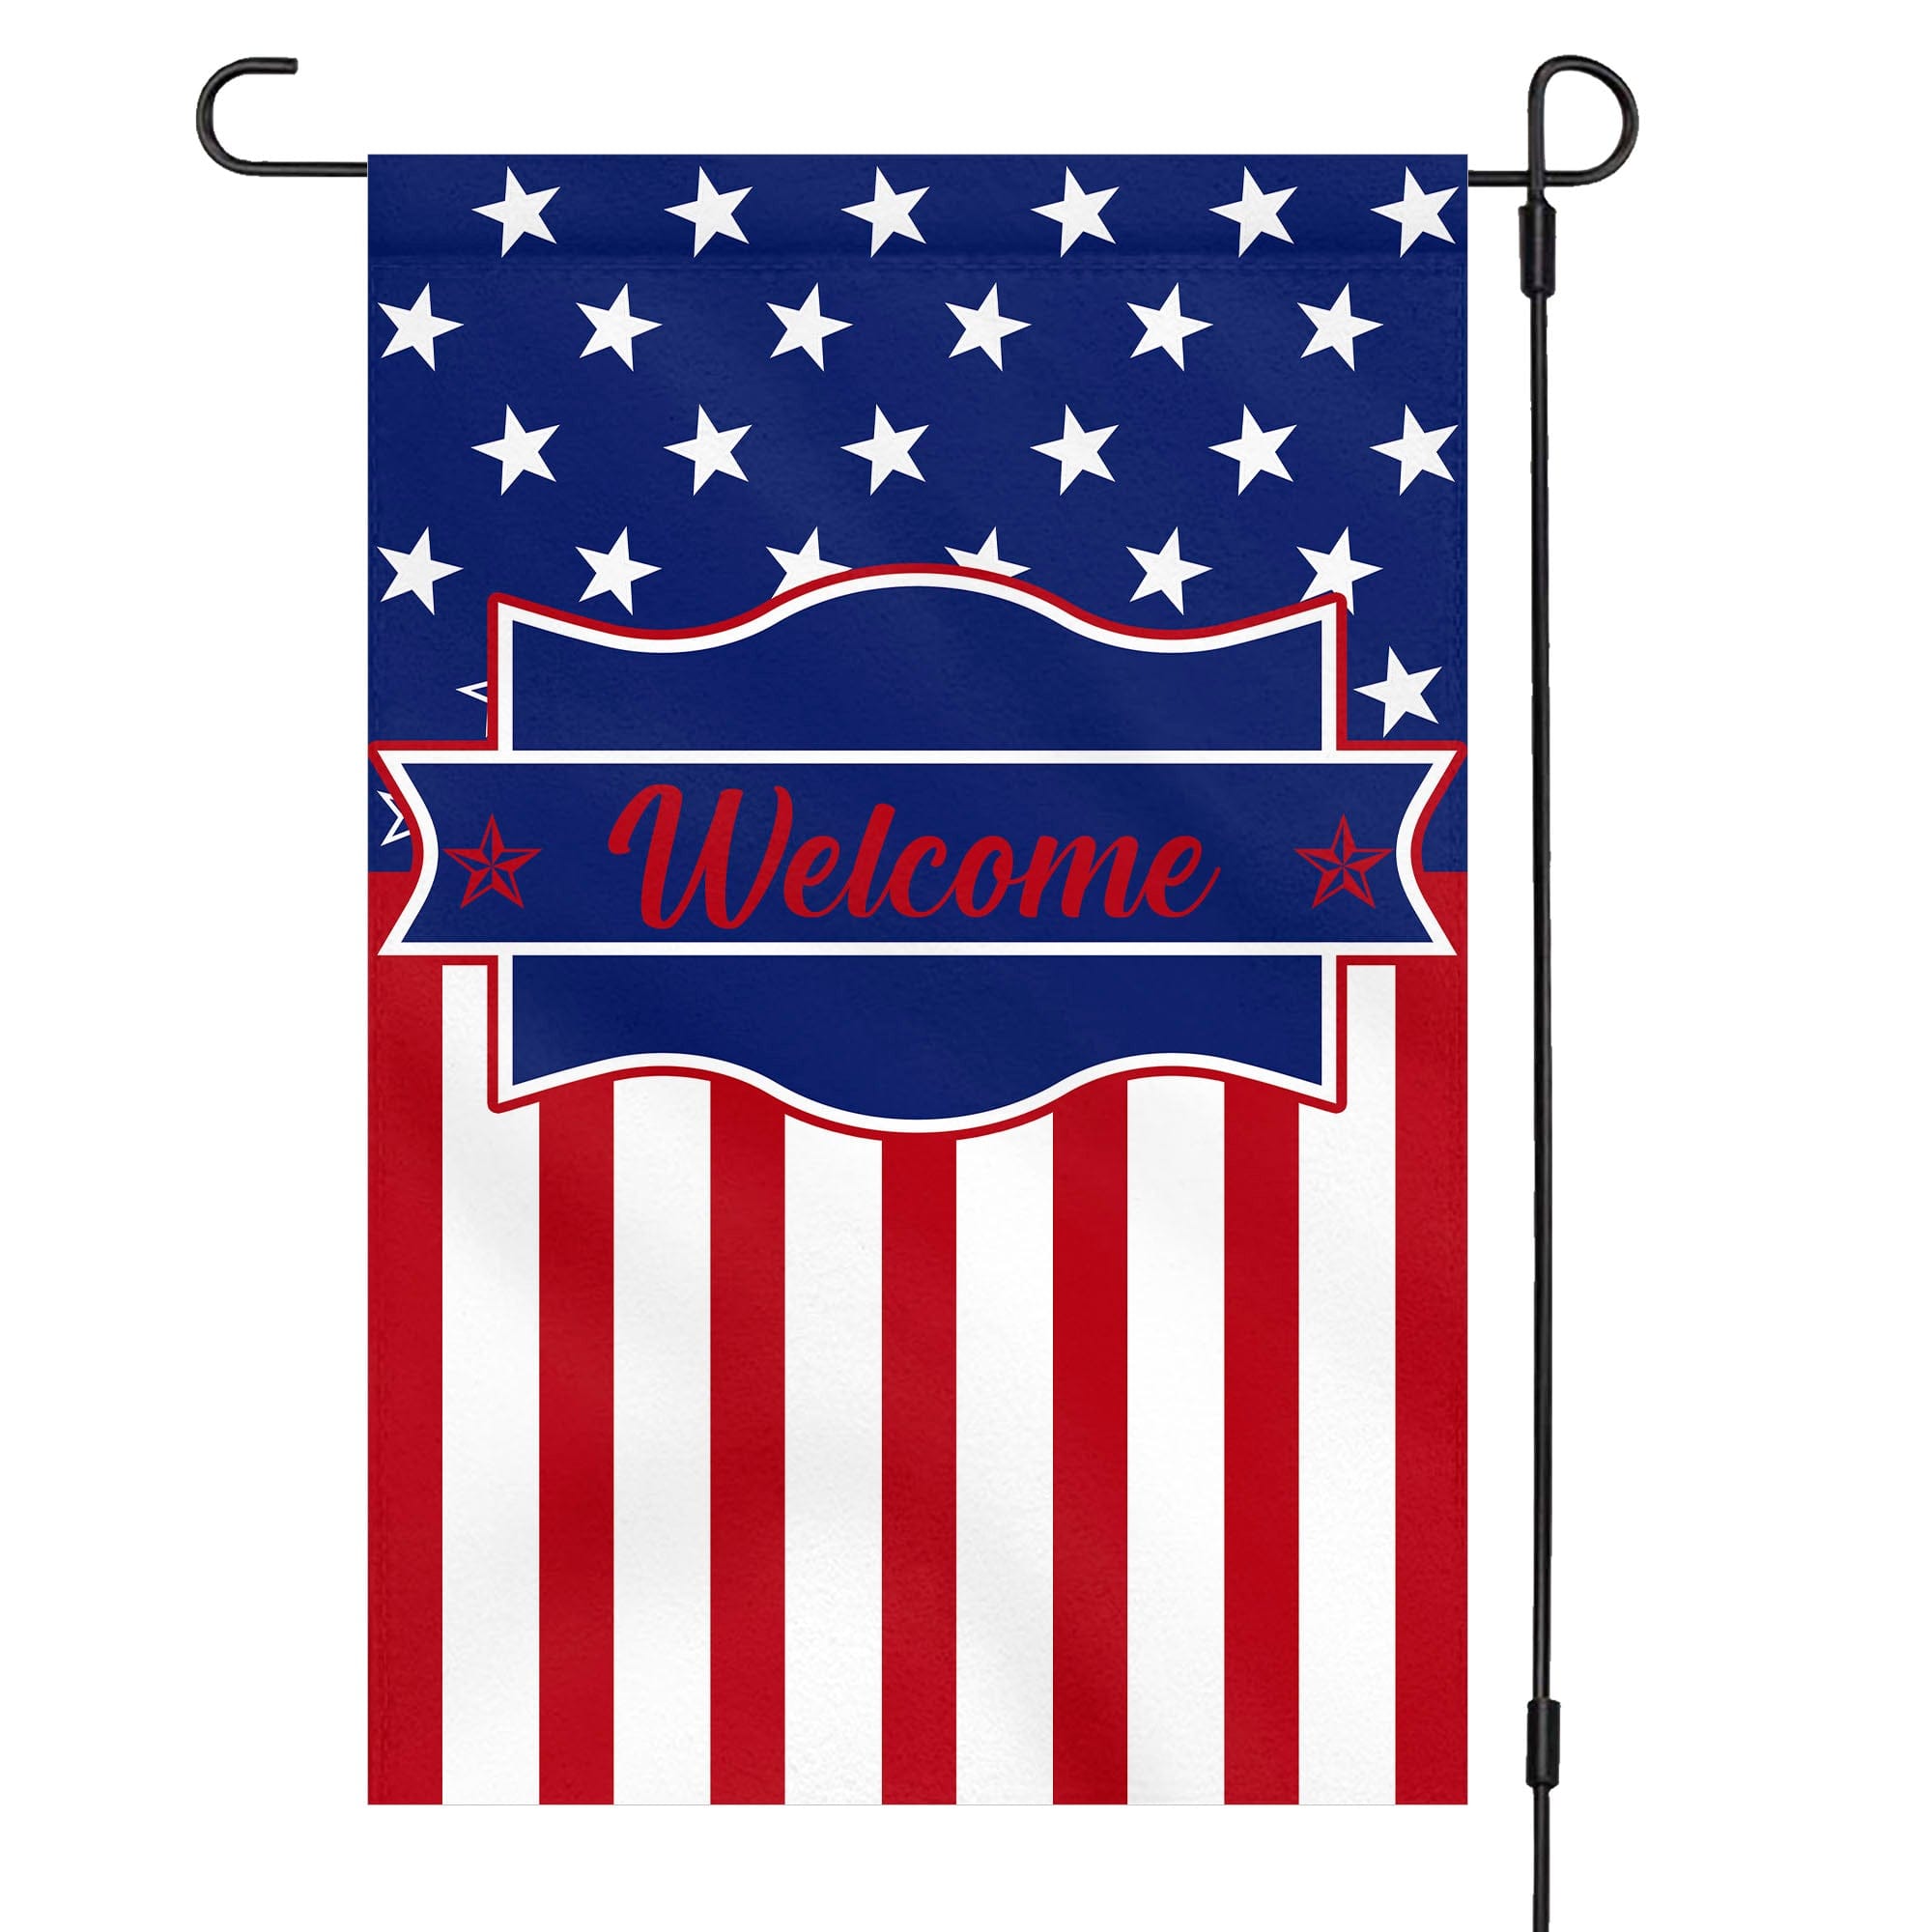 GeckoCustom Welcome Flag 4th Of July Personalized Custom Garden Flag H379 12"x18"